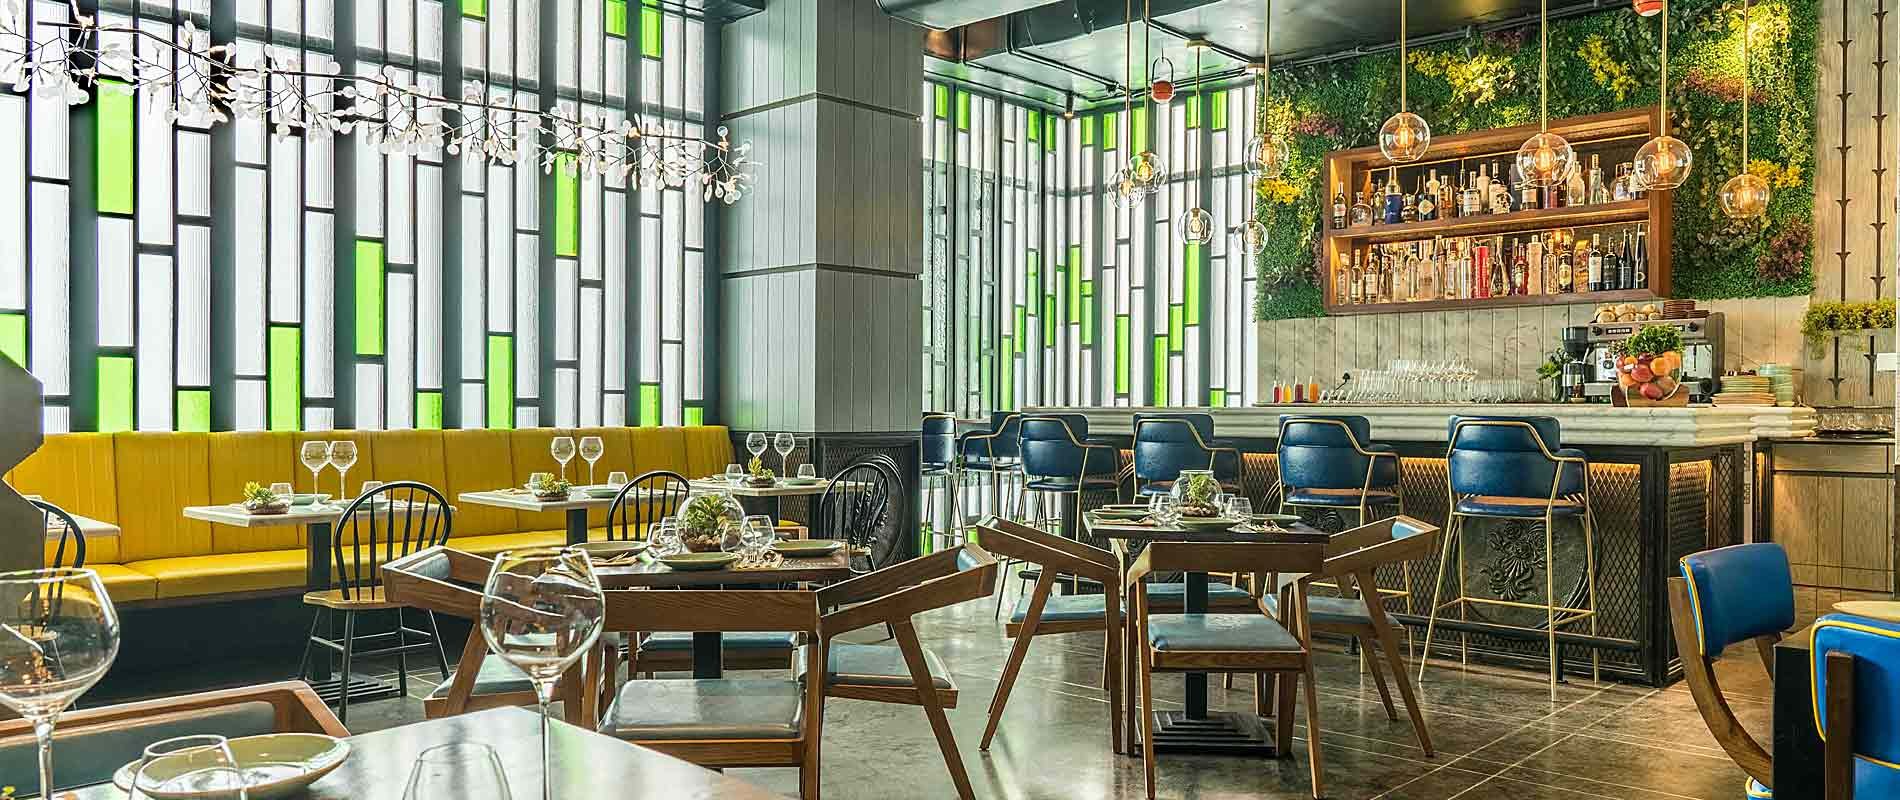 Candy and green vegetarian restaurant interior design, Vegetarian hotel interior design, Mumbai’s best hospitality interior design firm, Best Restaurant architects